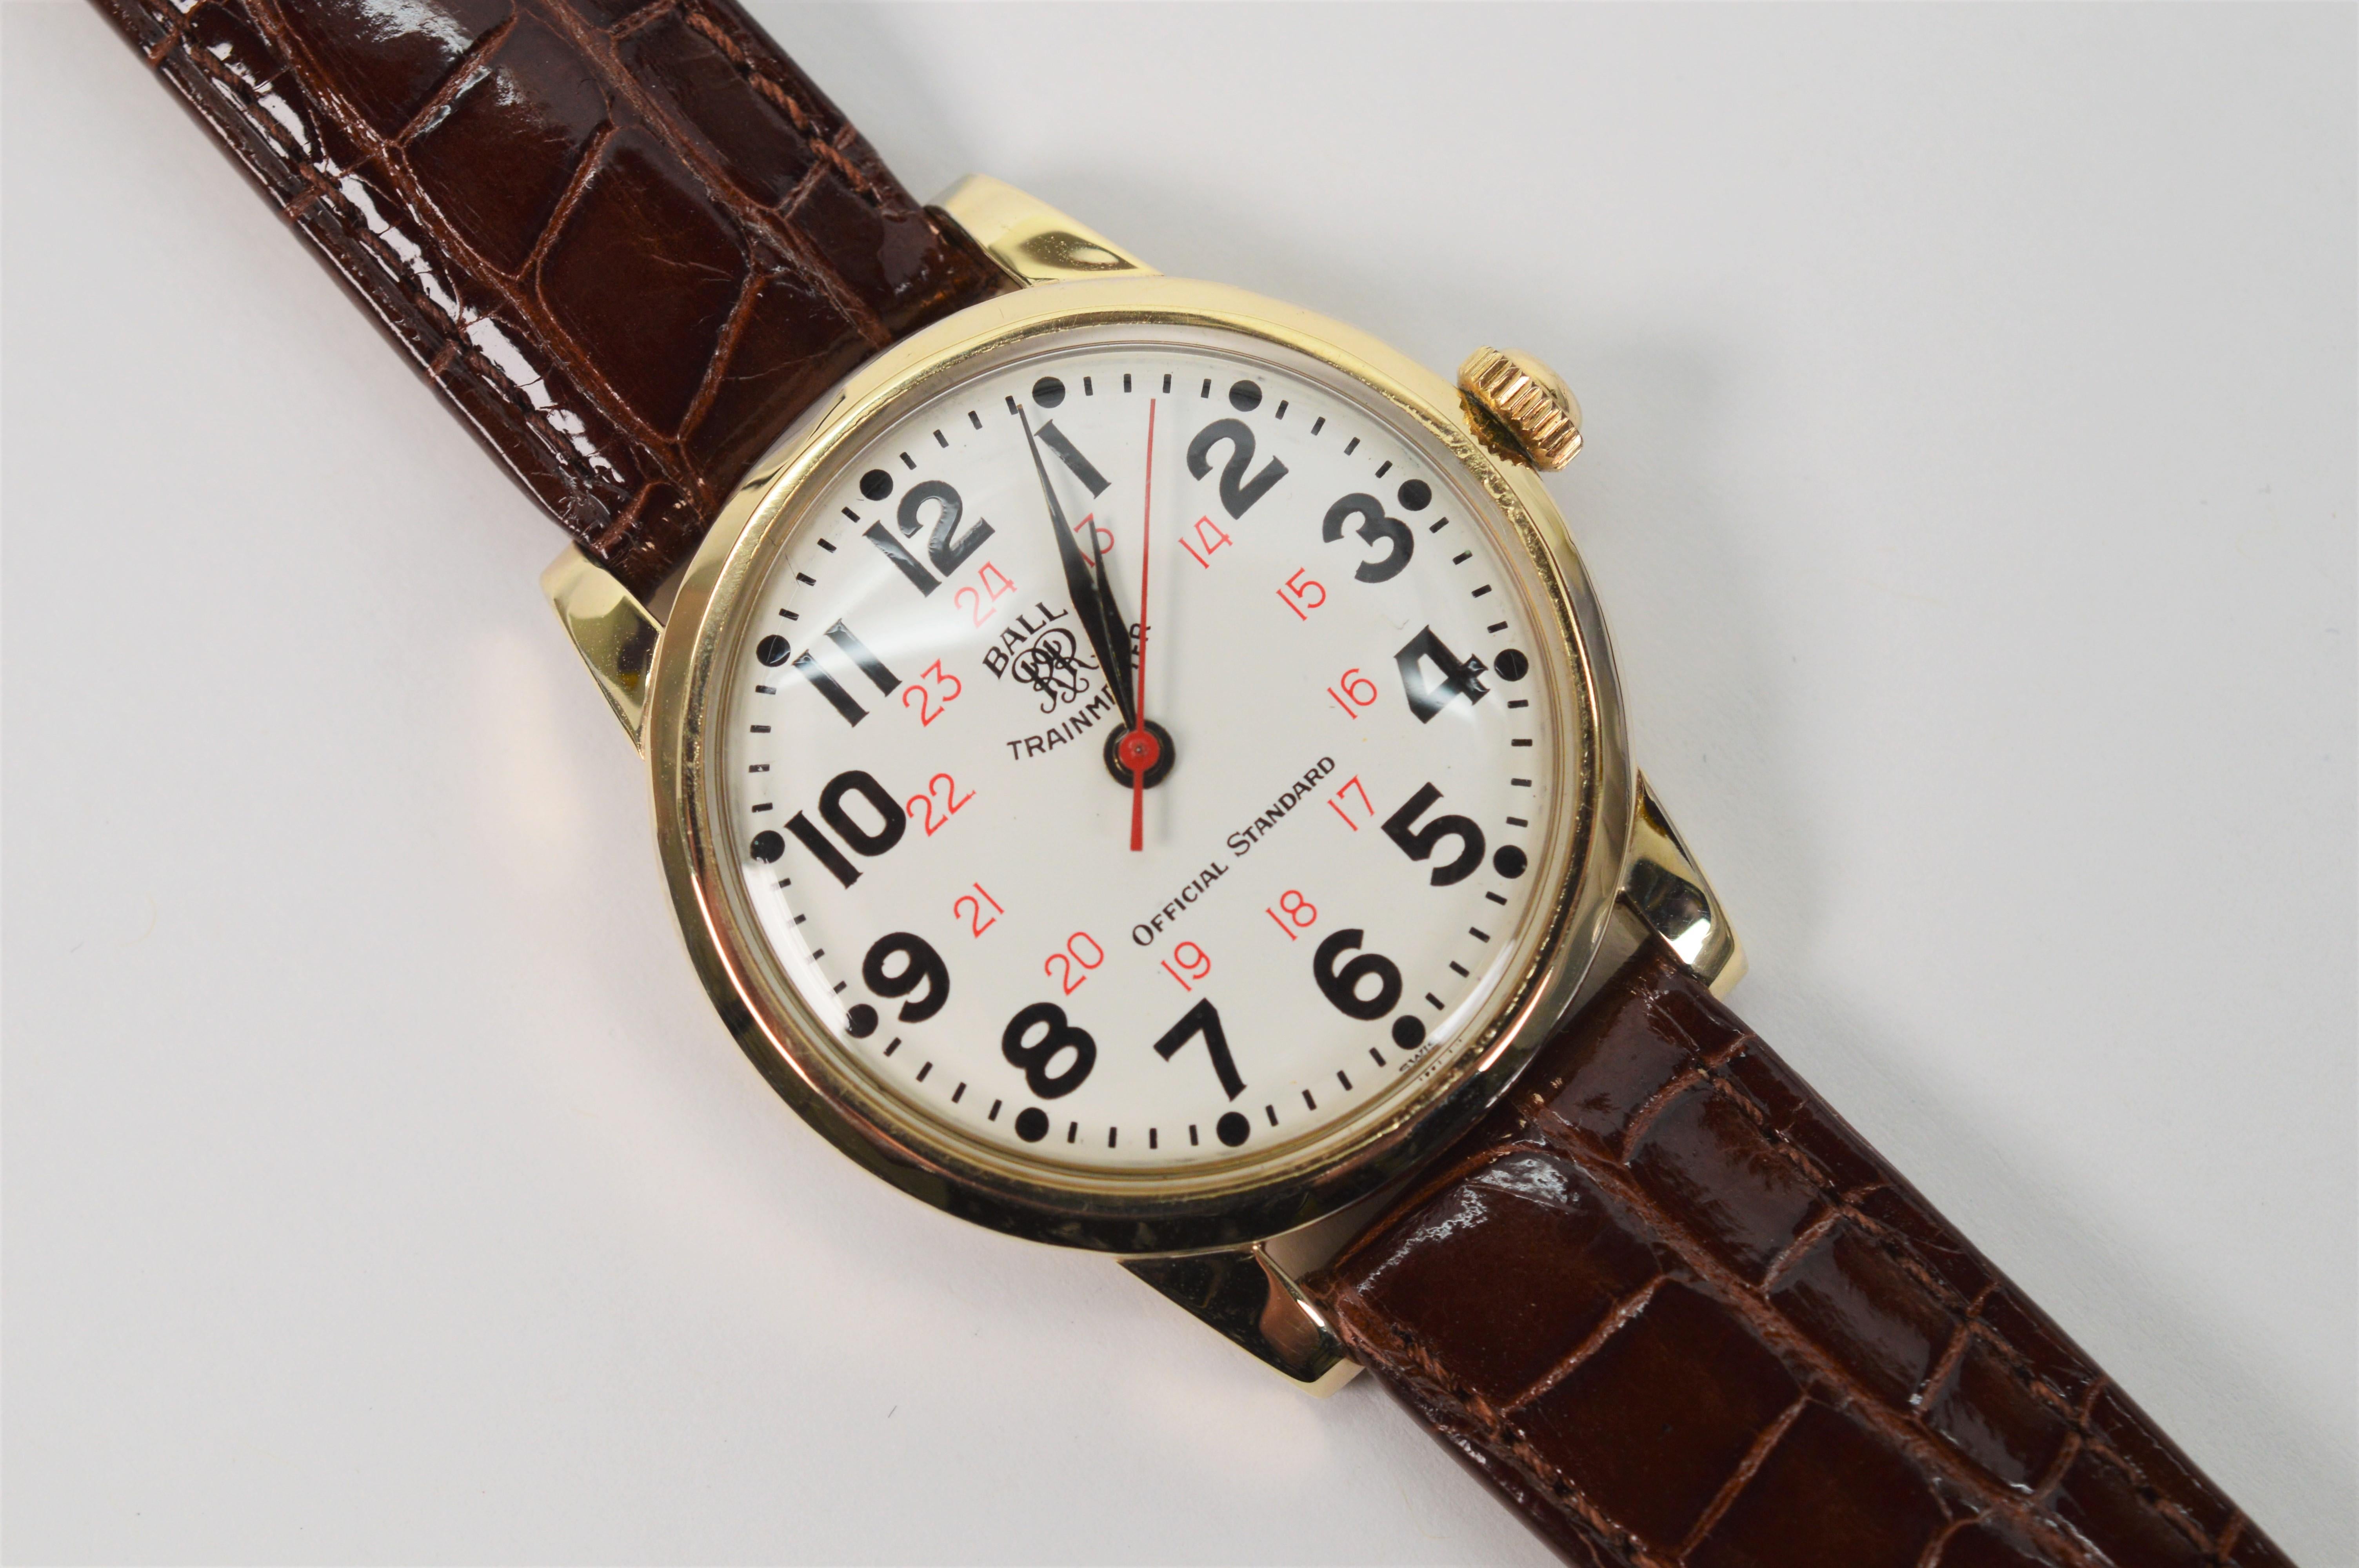 This 21 jeweled hand wound railroad chronometer by U.S. watchmaker Ball Watch Co. was specifically designed to comply with a conductor's  timekeeping requirement. The assured accuracy of the ETA 2821 movement and the easy to read white dial with